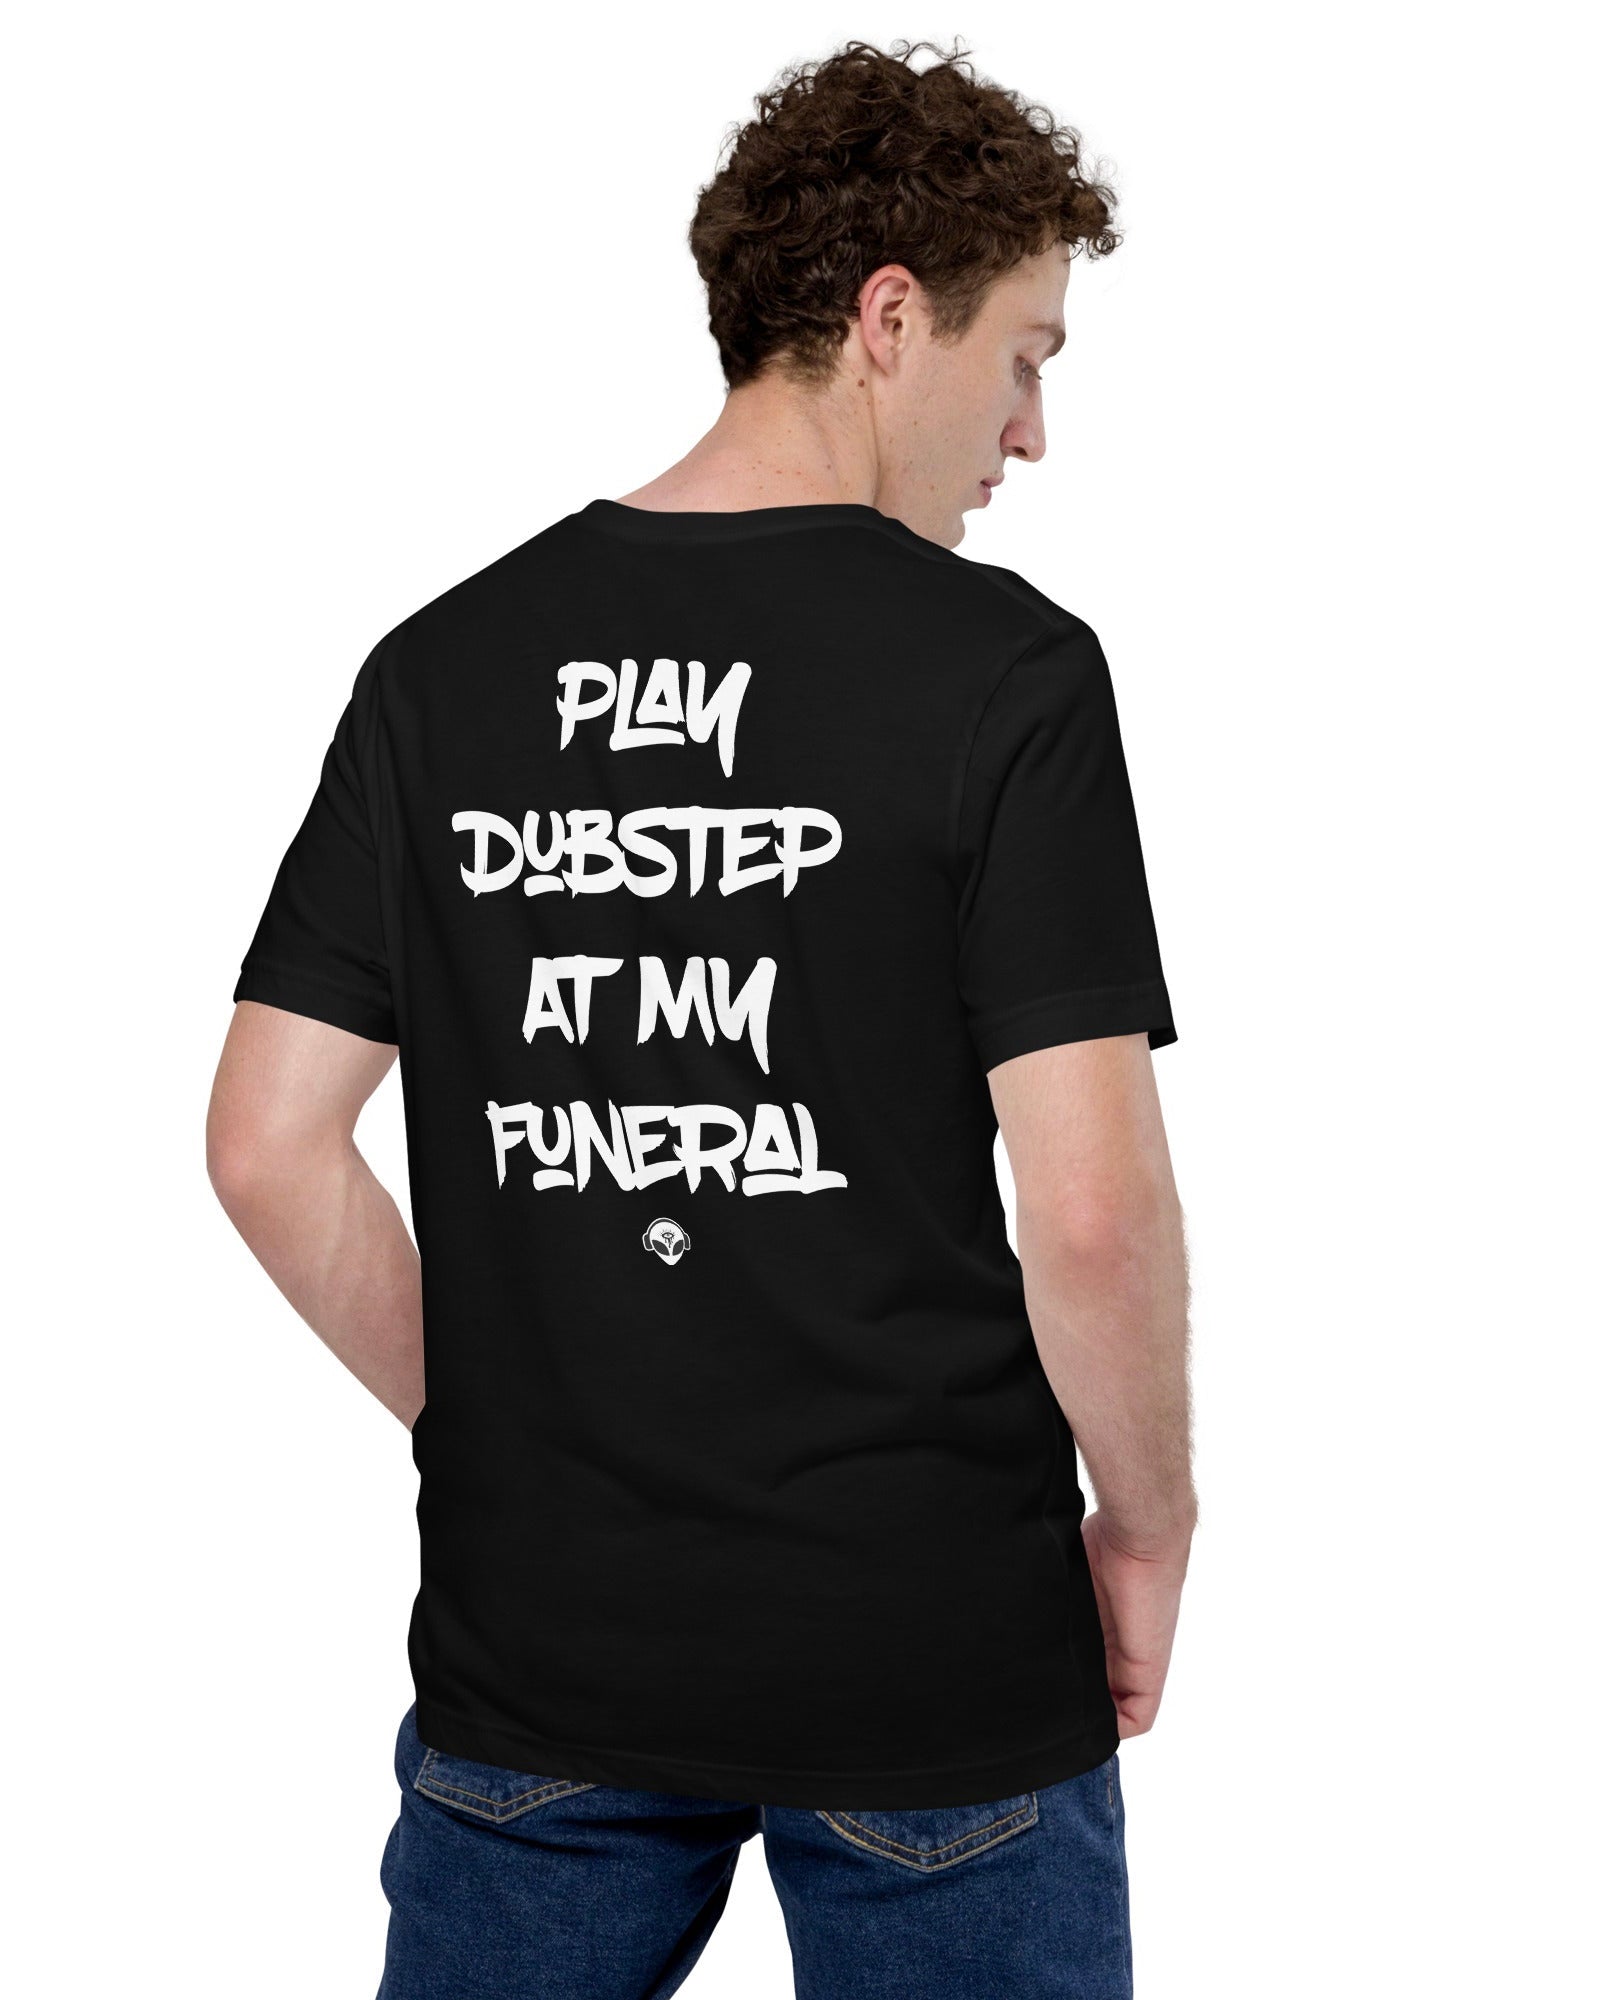 The back side of the model wearing a black t-shirt with the phrase "PLAY DUBSTEP AT MY FUNERAL" & an alien head below it.